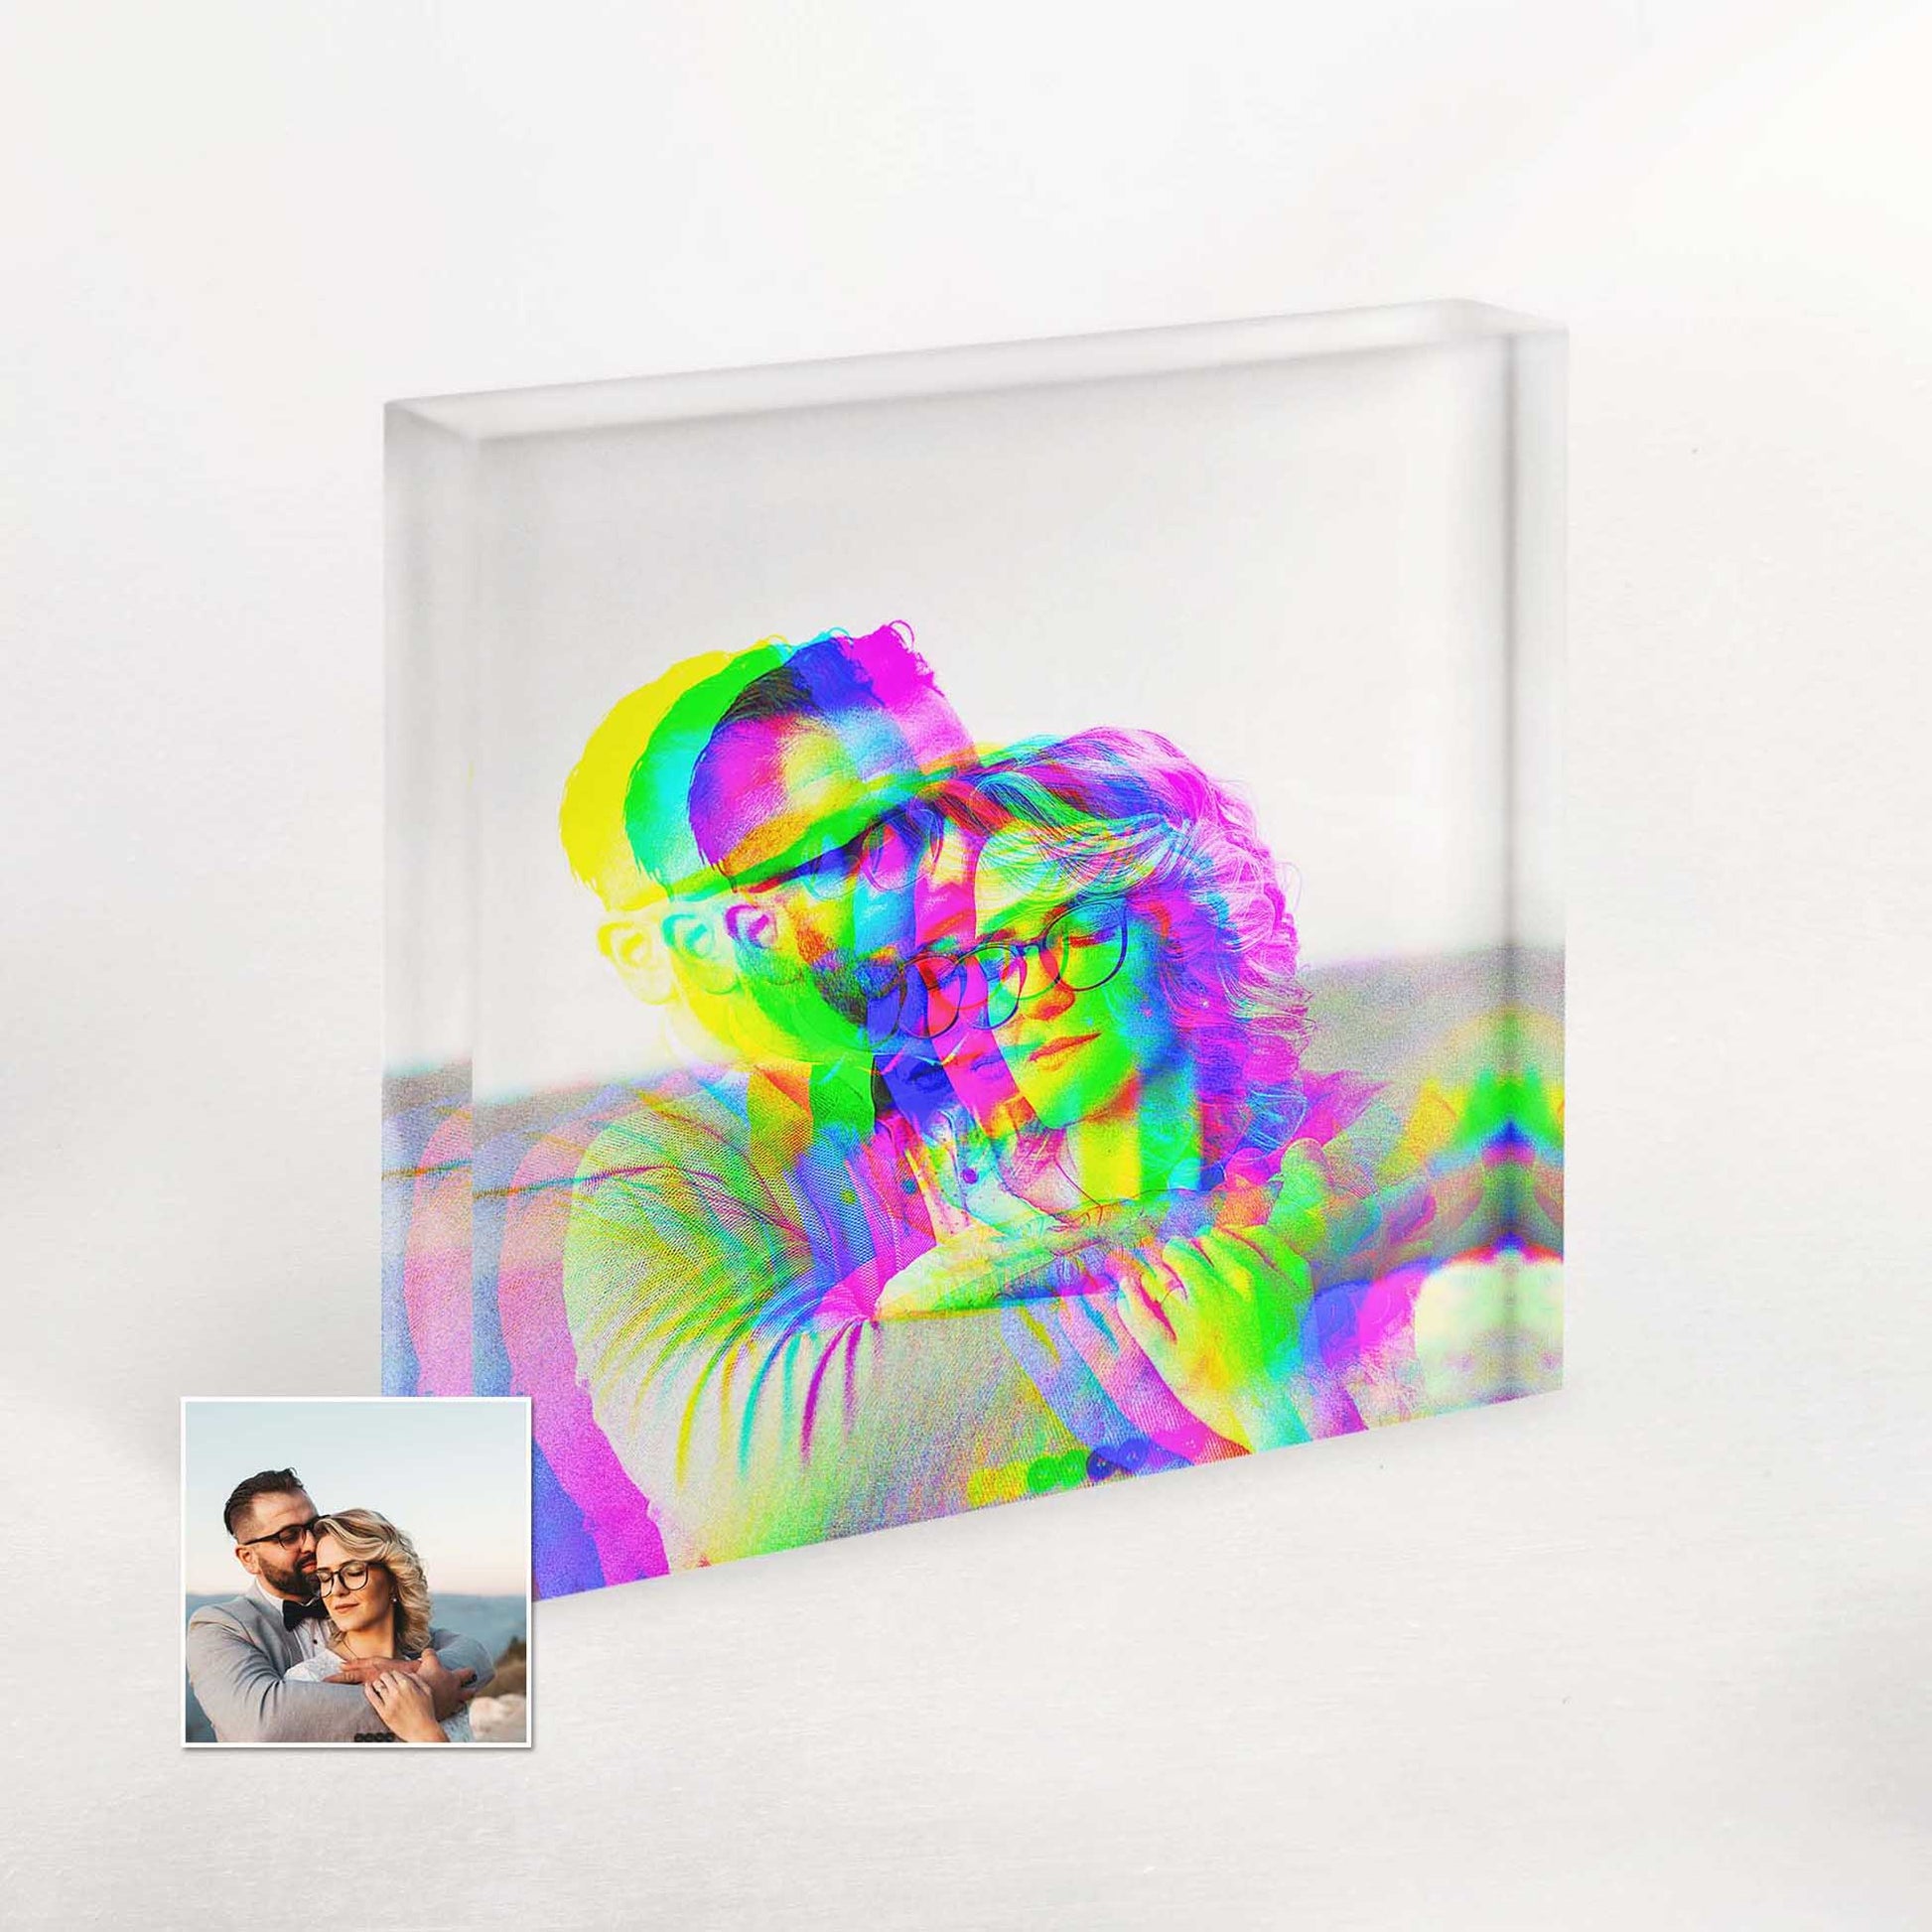 Add a touch of magic to your home decor with our Personalized Anaglyph 3D Effect Acrylic Block Photo. Its innovative design combines the nostalgia of classic 3D with a contemporary twist, resulting in a unique and creative piece that stands out